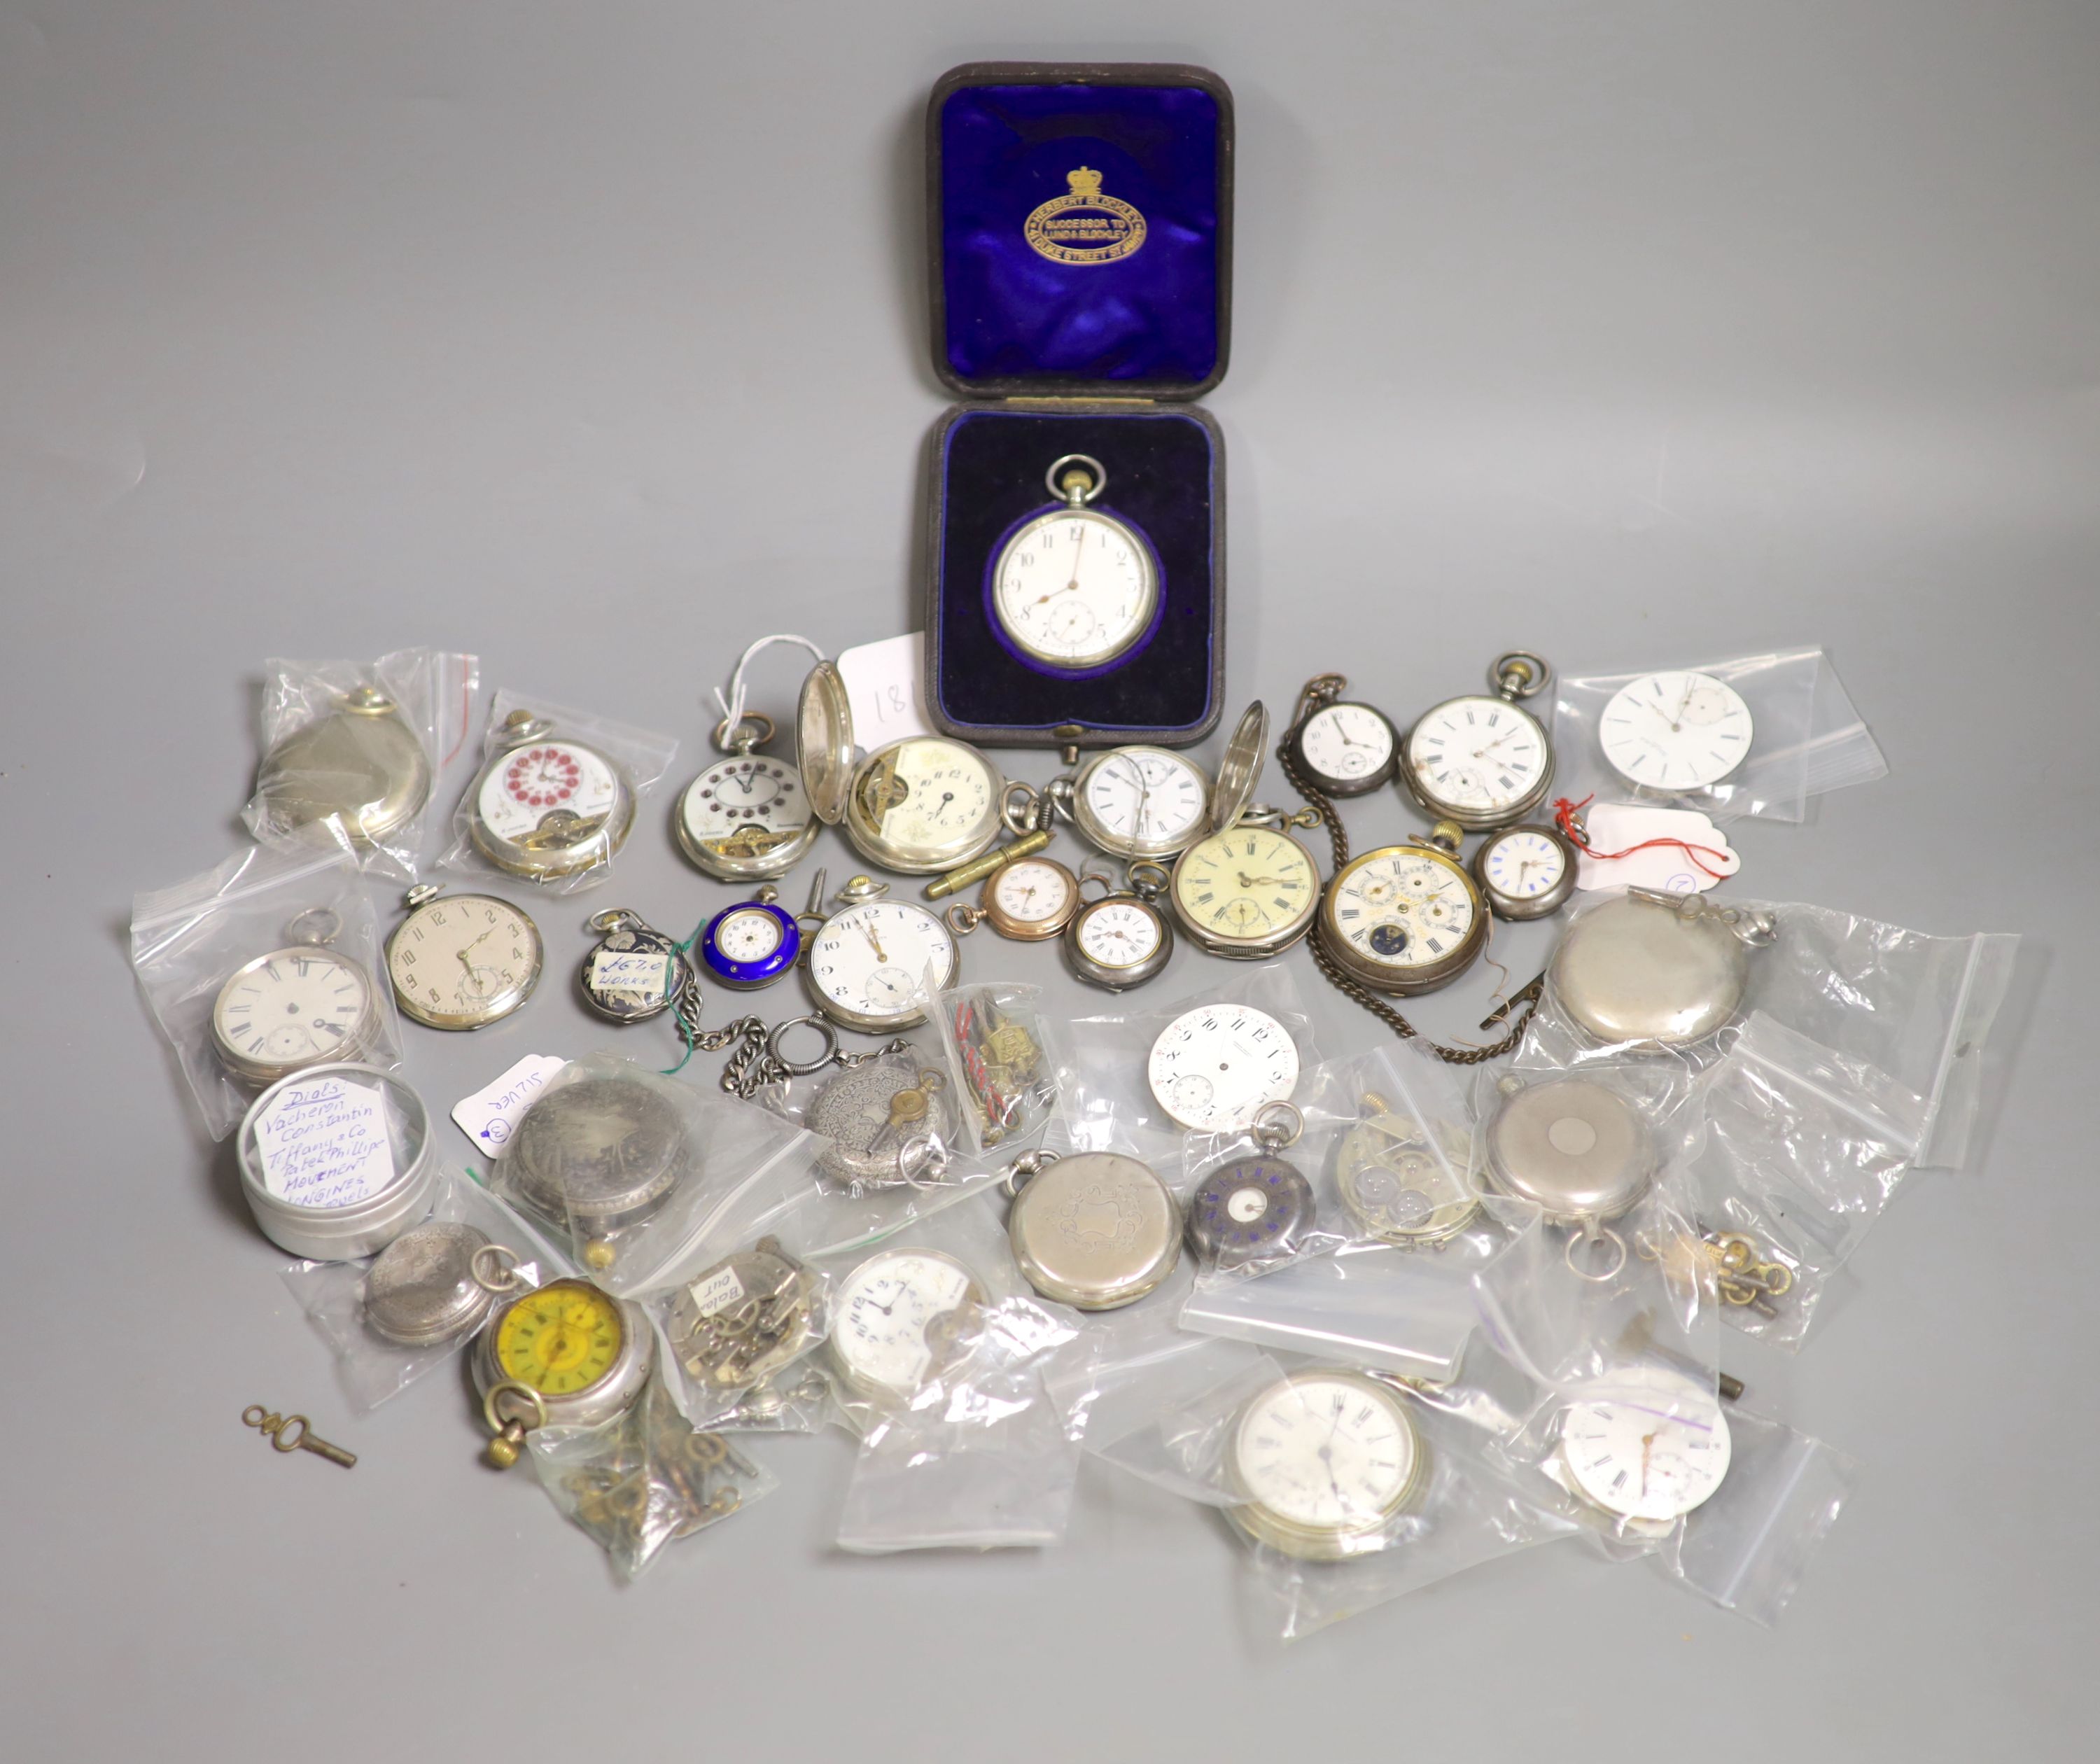 A quantity of pocket watches, movements etc. including three Hebdomas, one 800 standard, a Zenith,